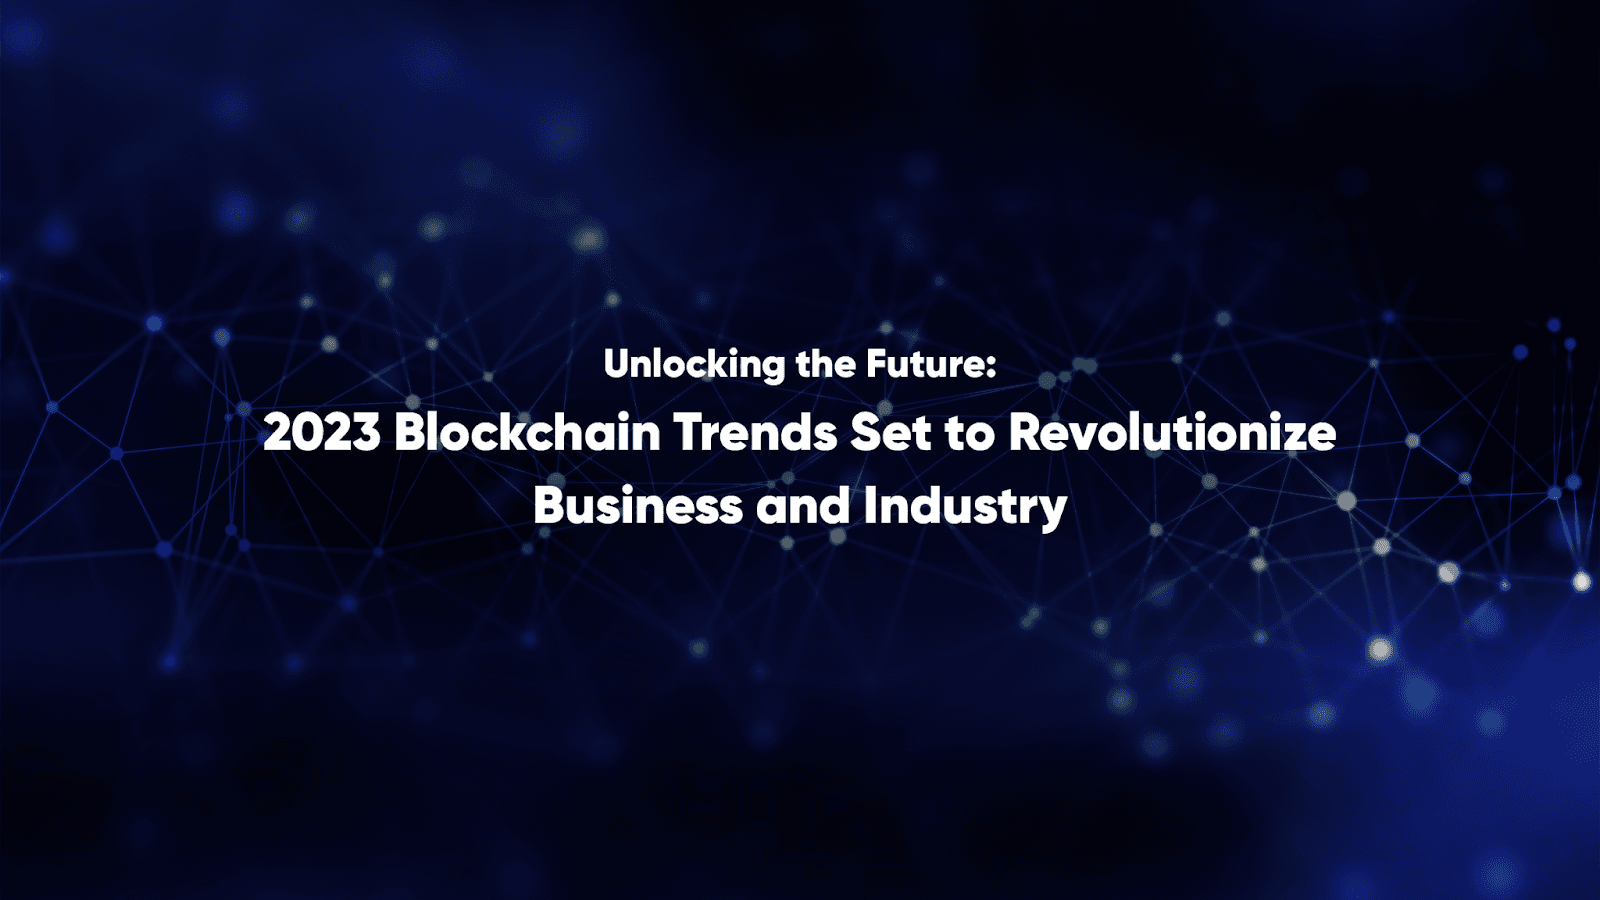 Unlocking the Future: 2023 Blockchain Trends Set to Revolutionize Business and Industry